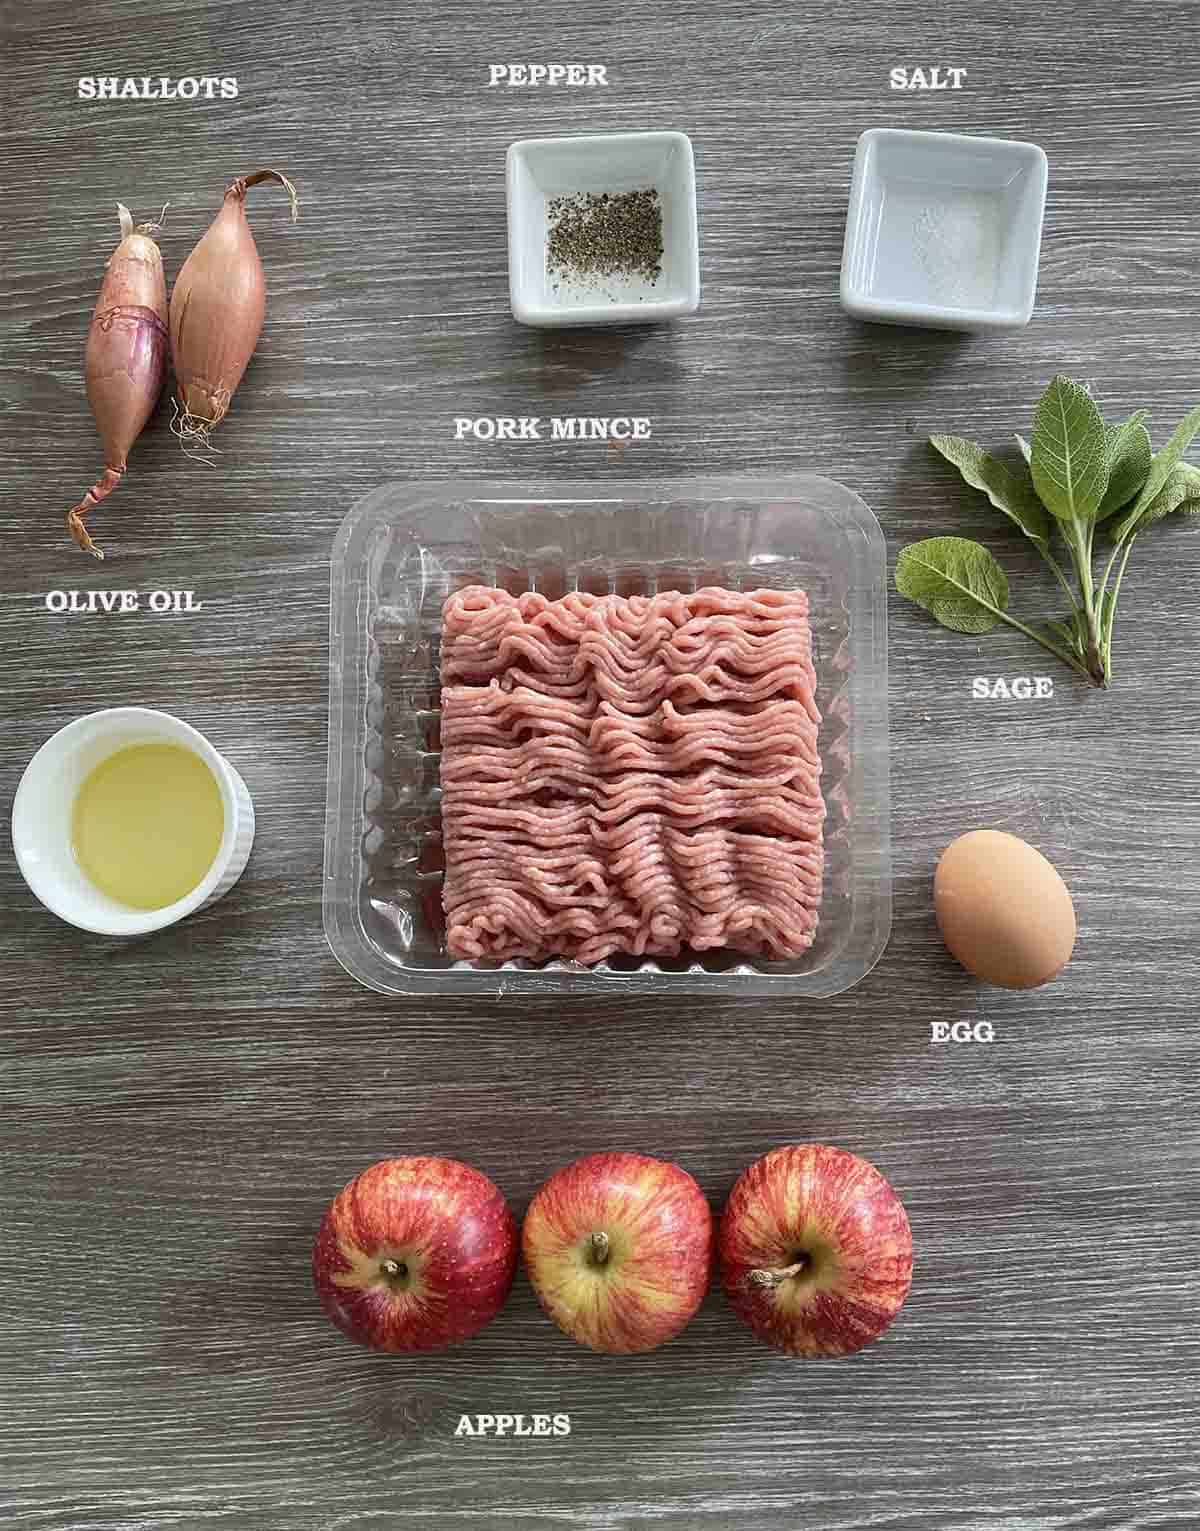 ingredients including pork mince, sage, apples and onion.